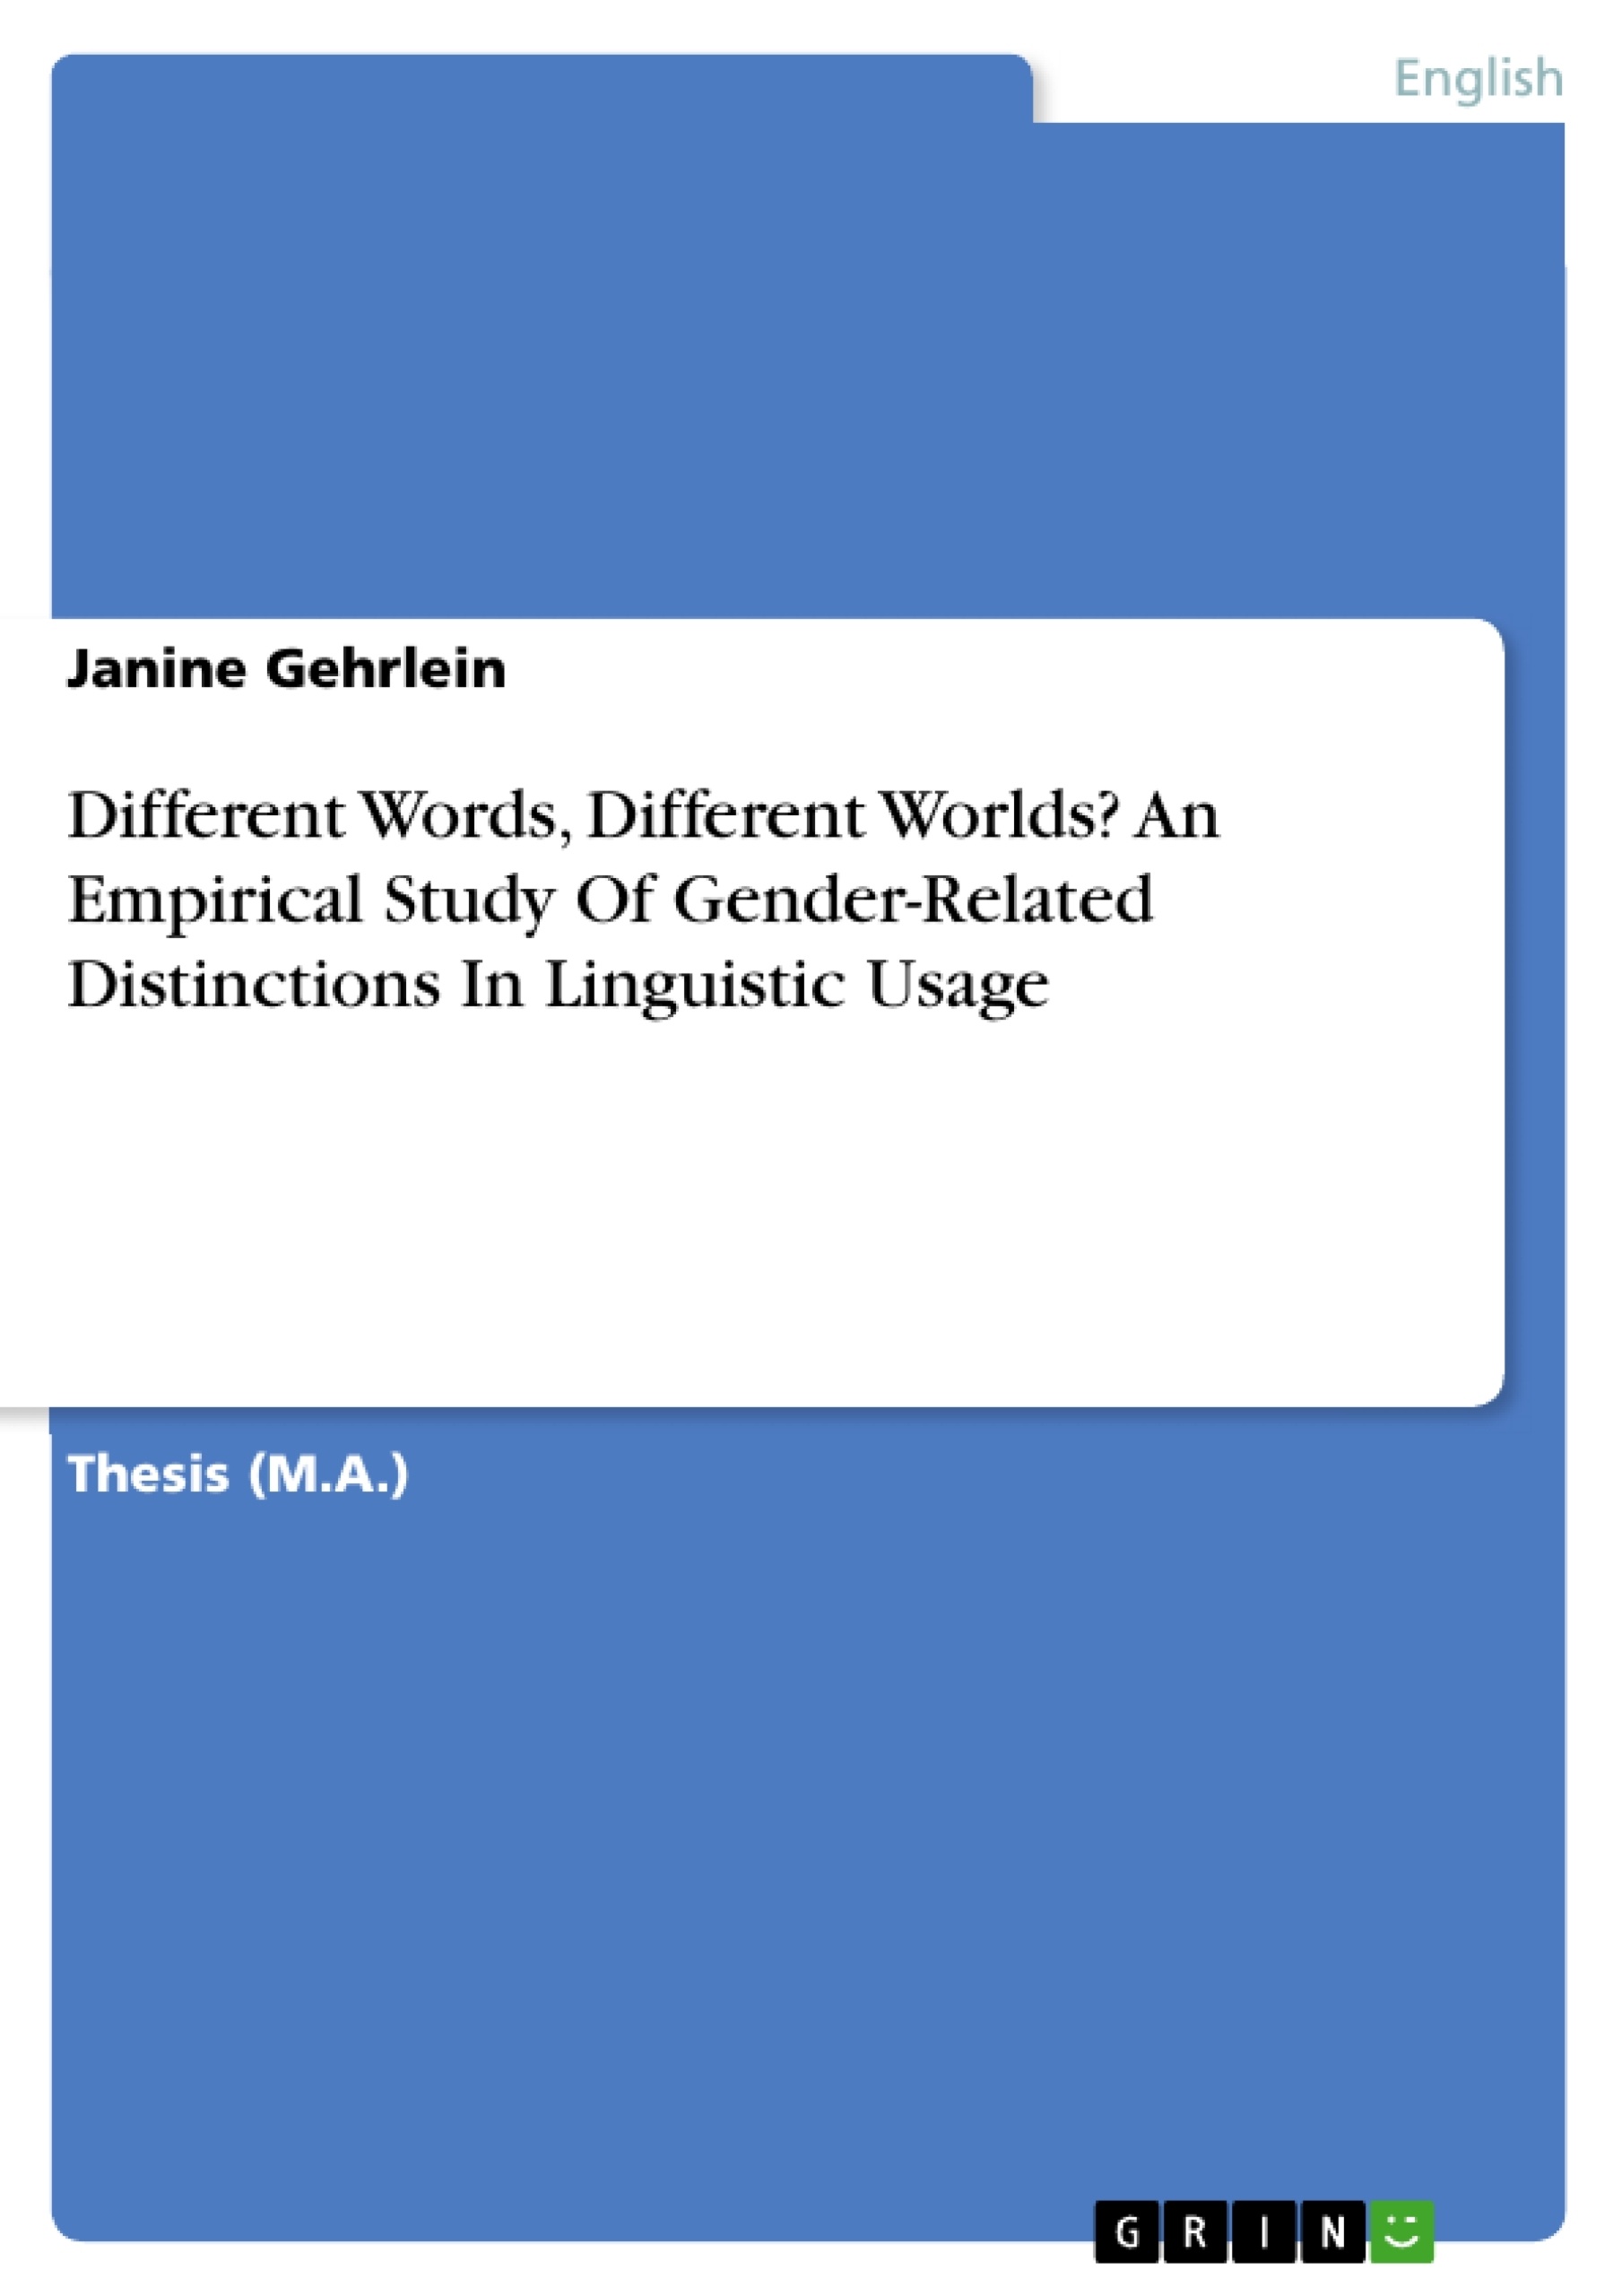 Titre: Different Words, Different Worlds? An Empirical Study Of Gender-Related Distinctions In Linguistic Usage